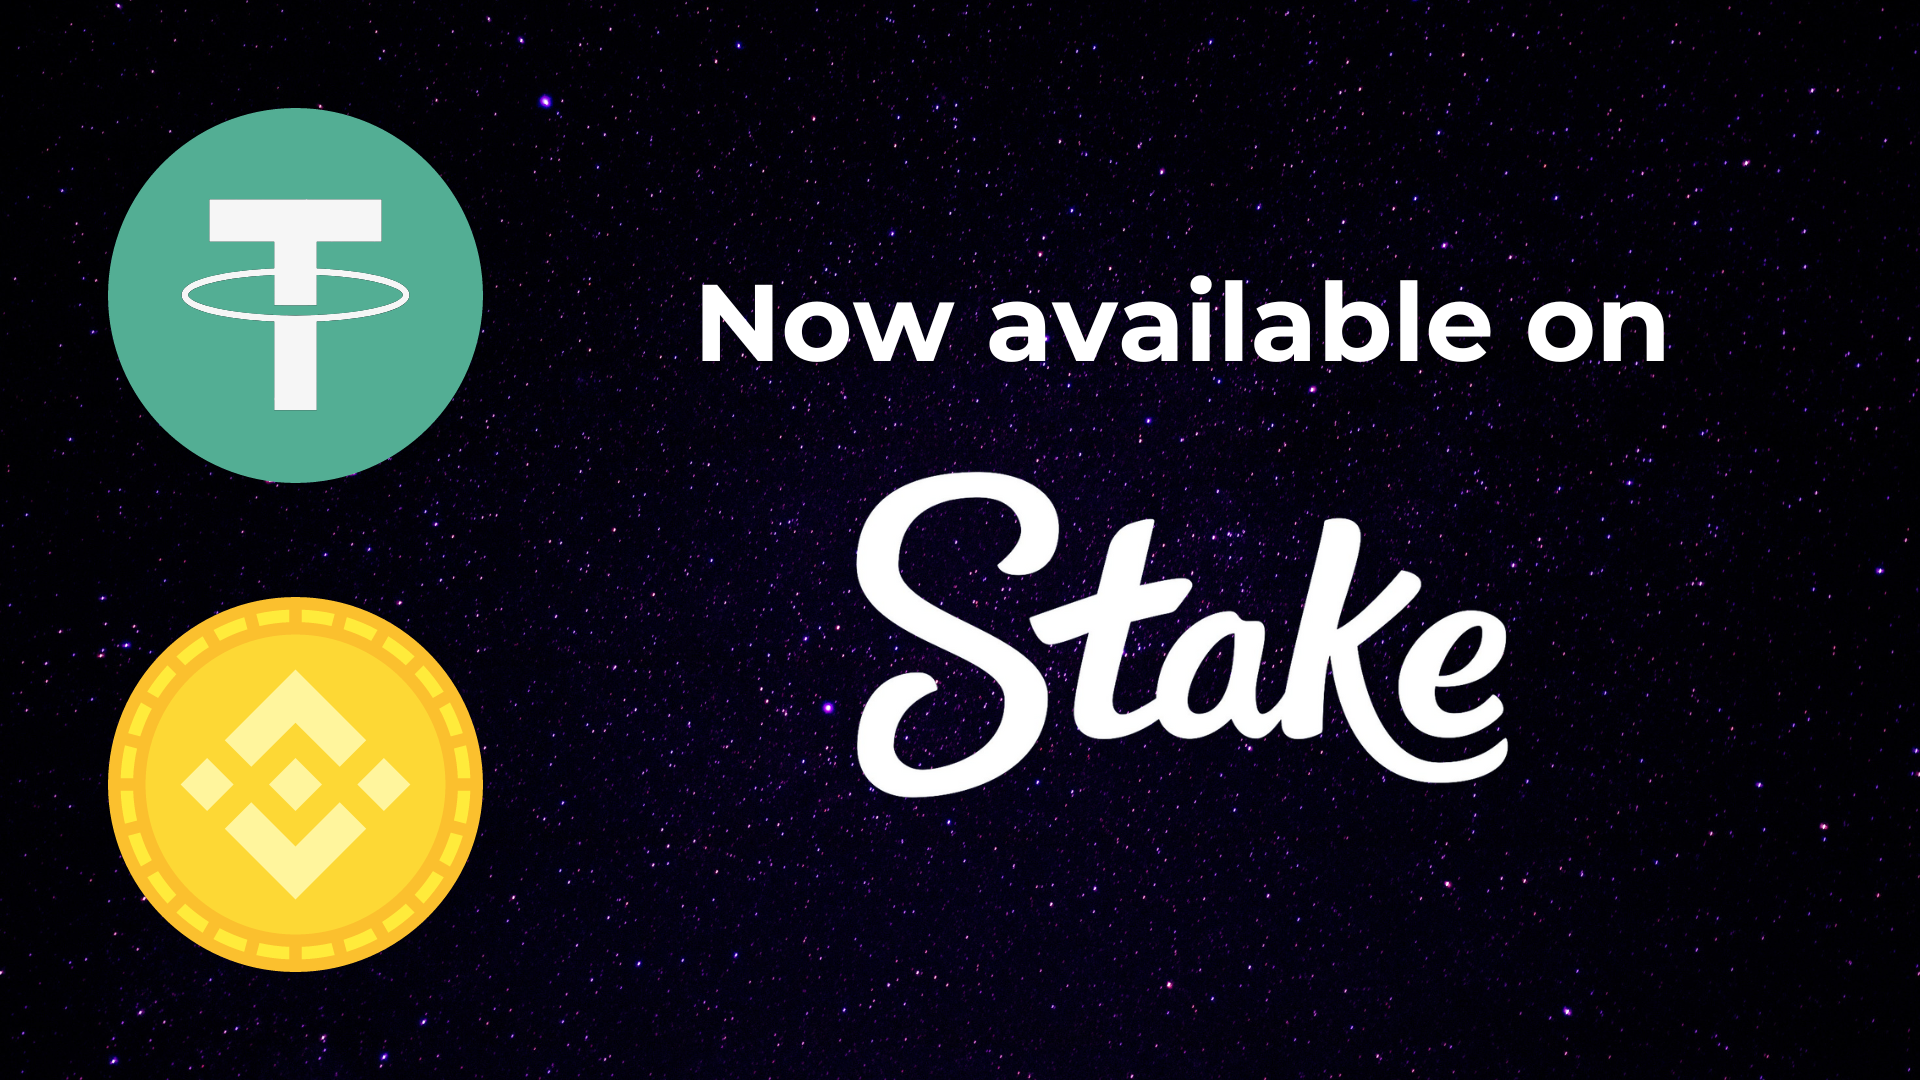 stake online crypto casino usdt bnb payments smartcasinoguide